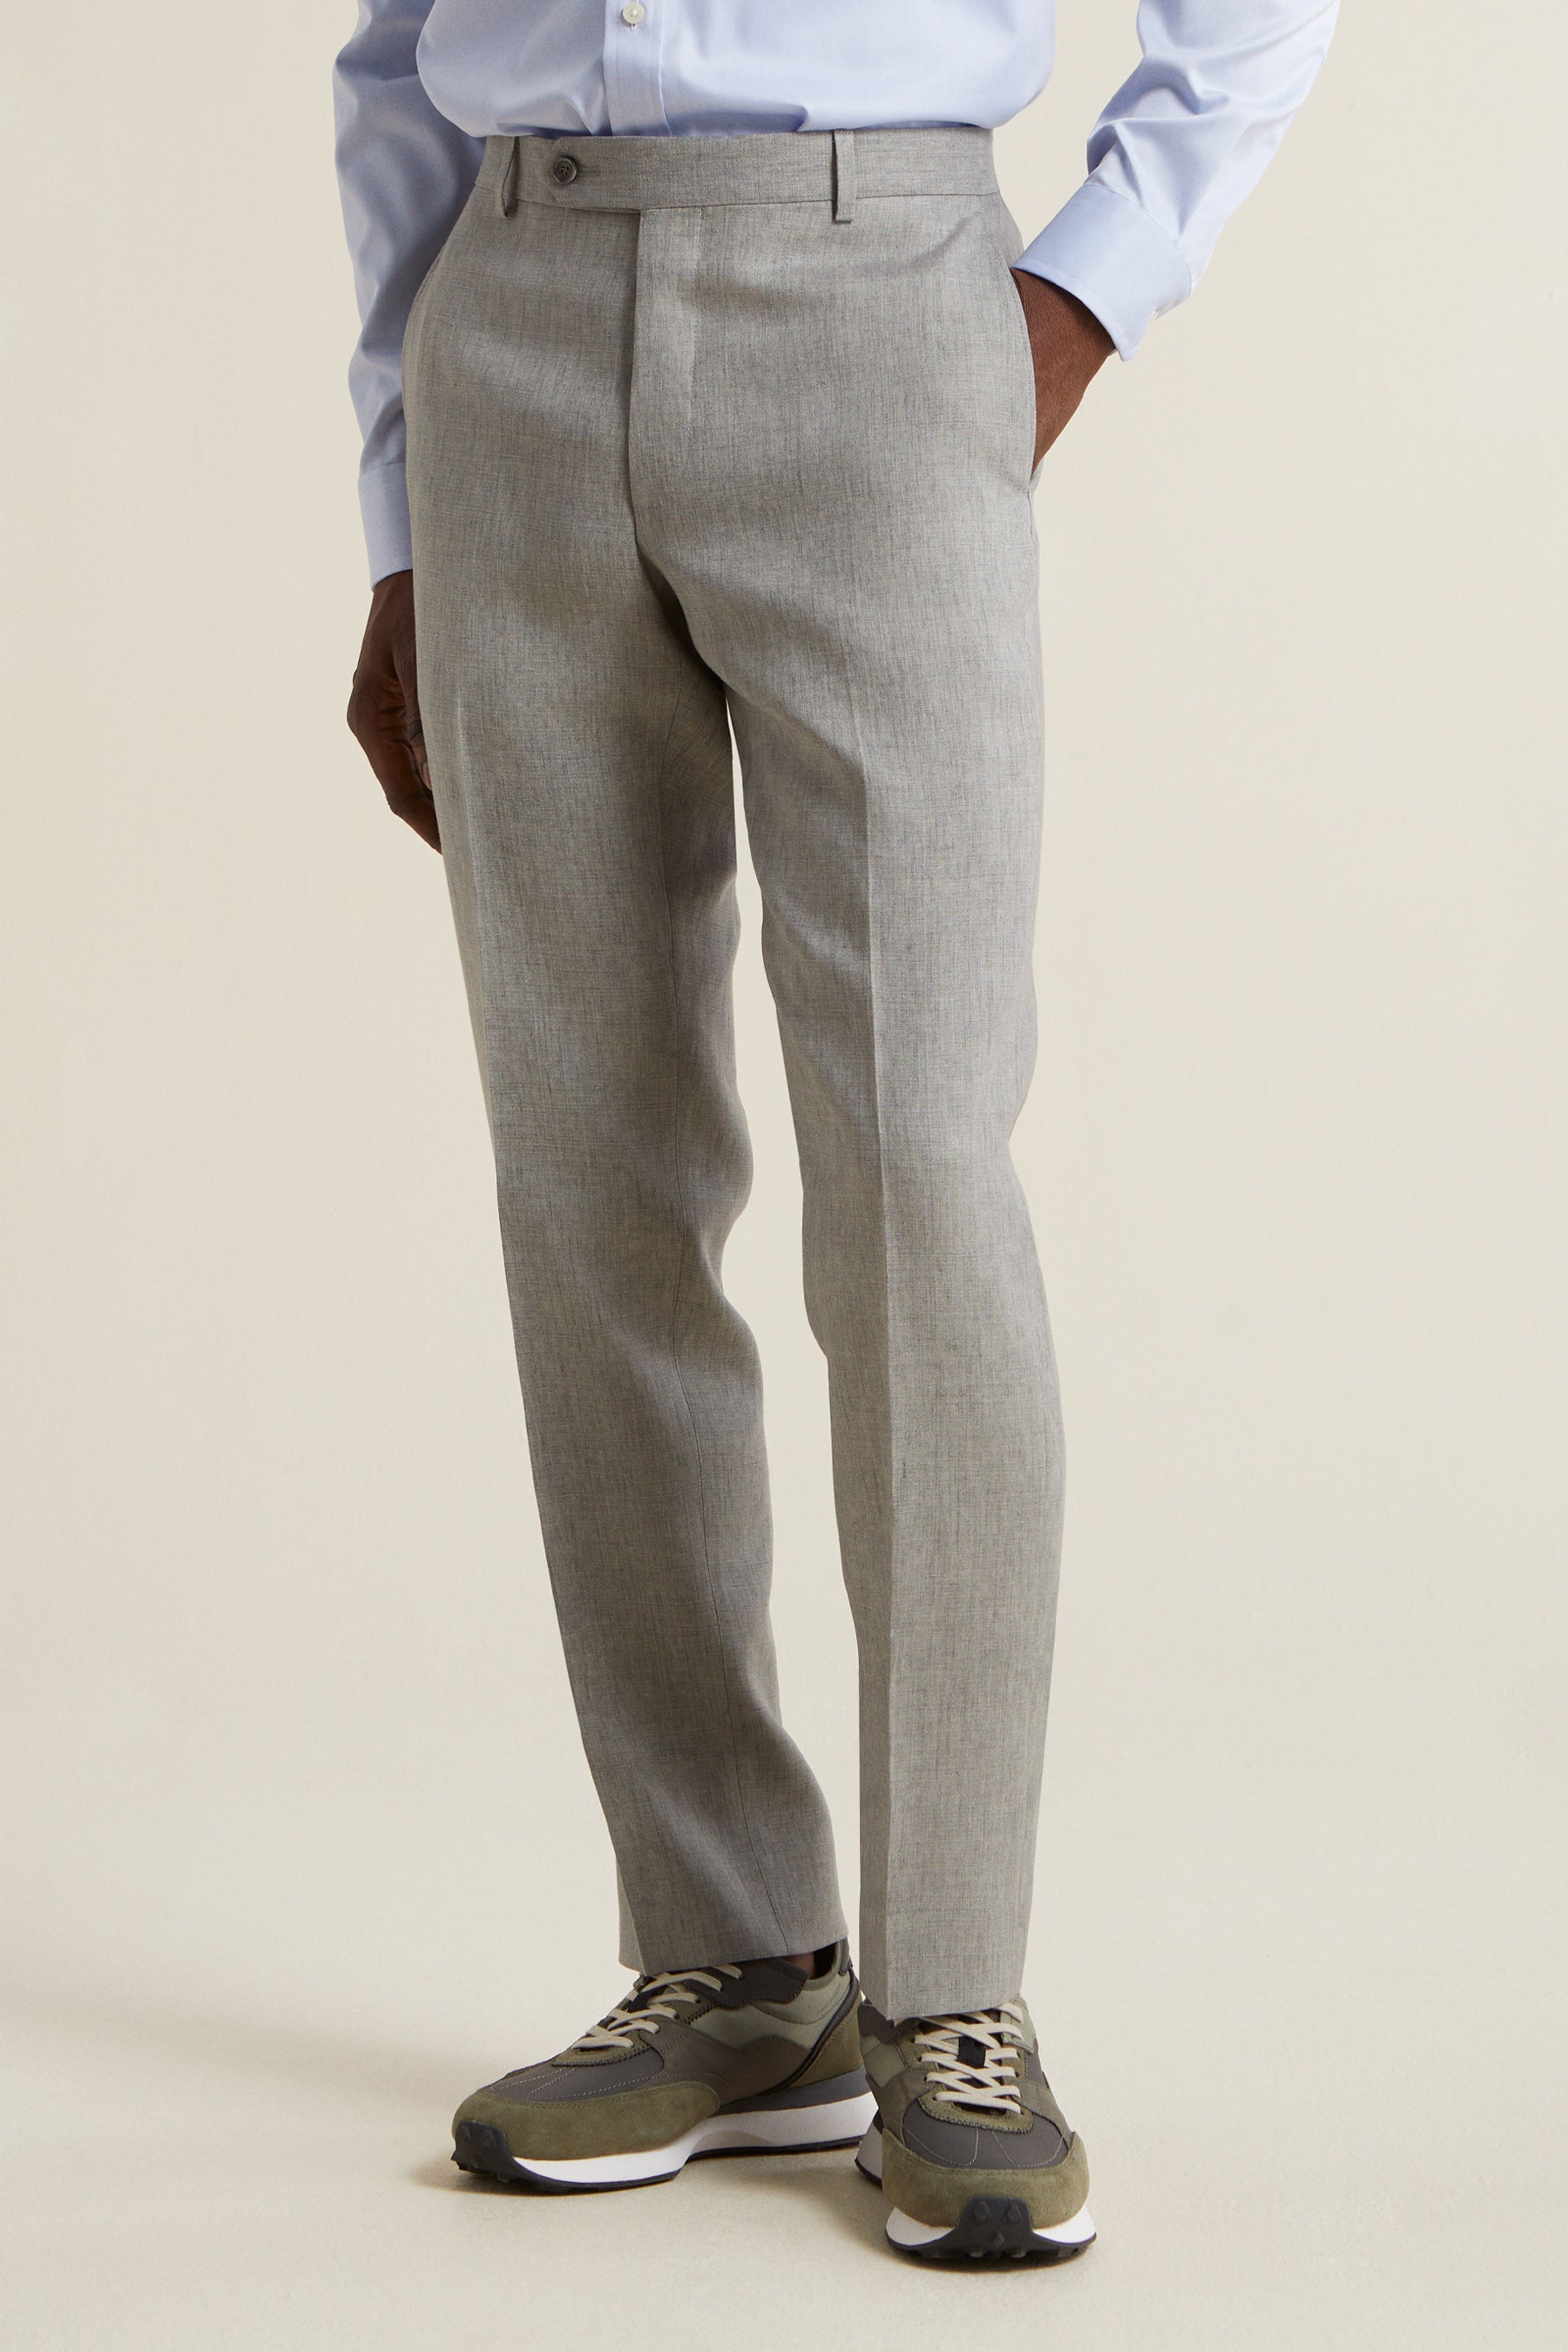 Canali  Grey Tropical Wool Flat Front Trousers  Baltzar